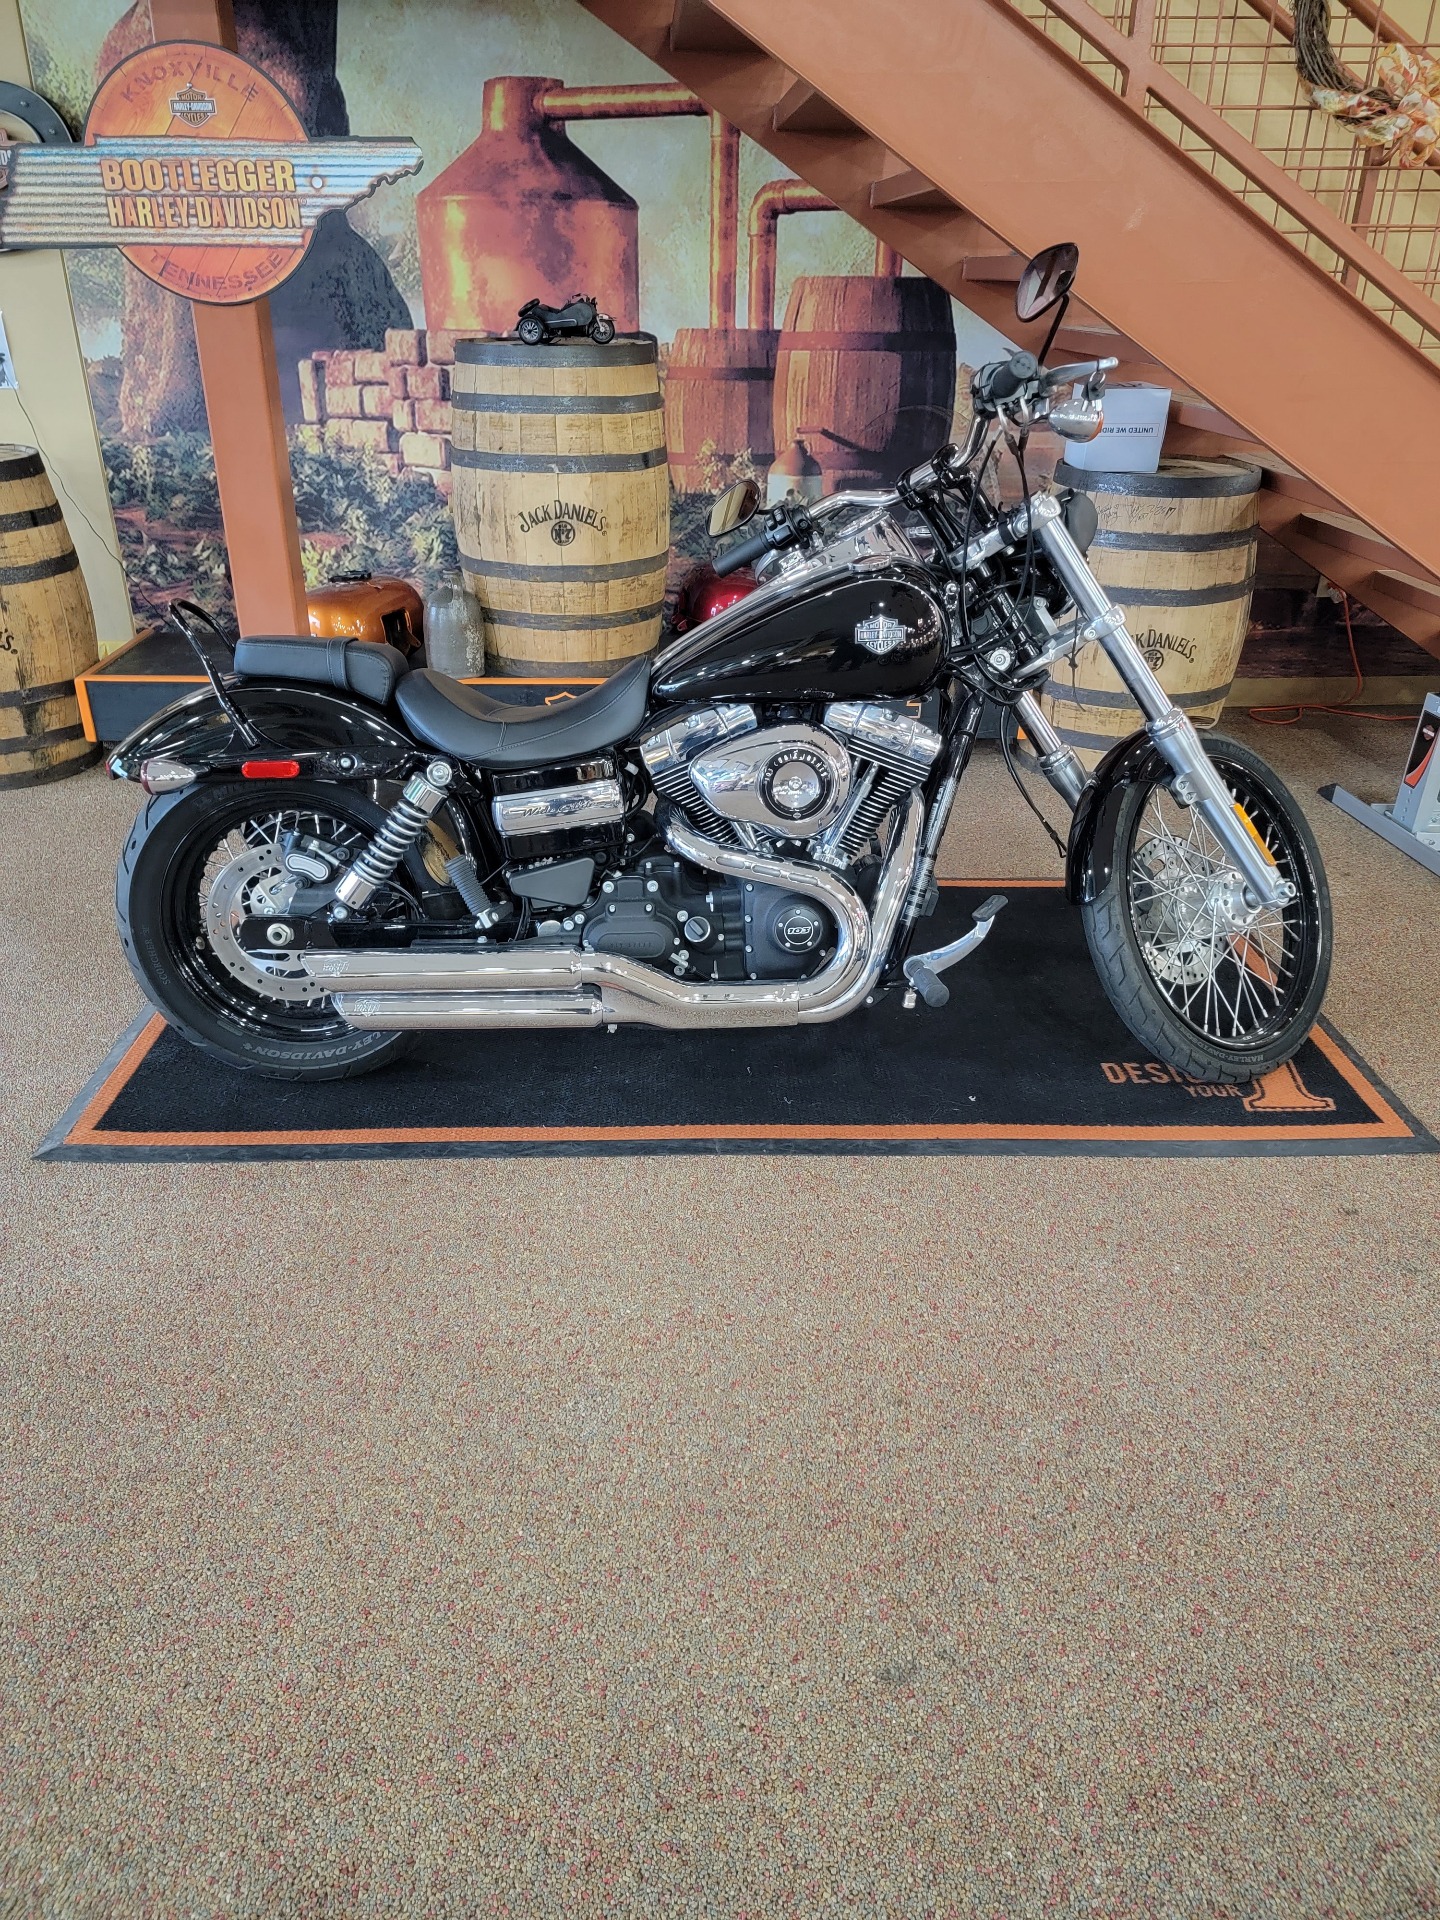 2015 Harley-Davidson Wide Glide® in Knoxville, Tennessee - Photo 2